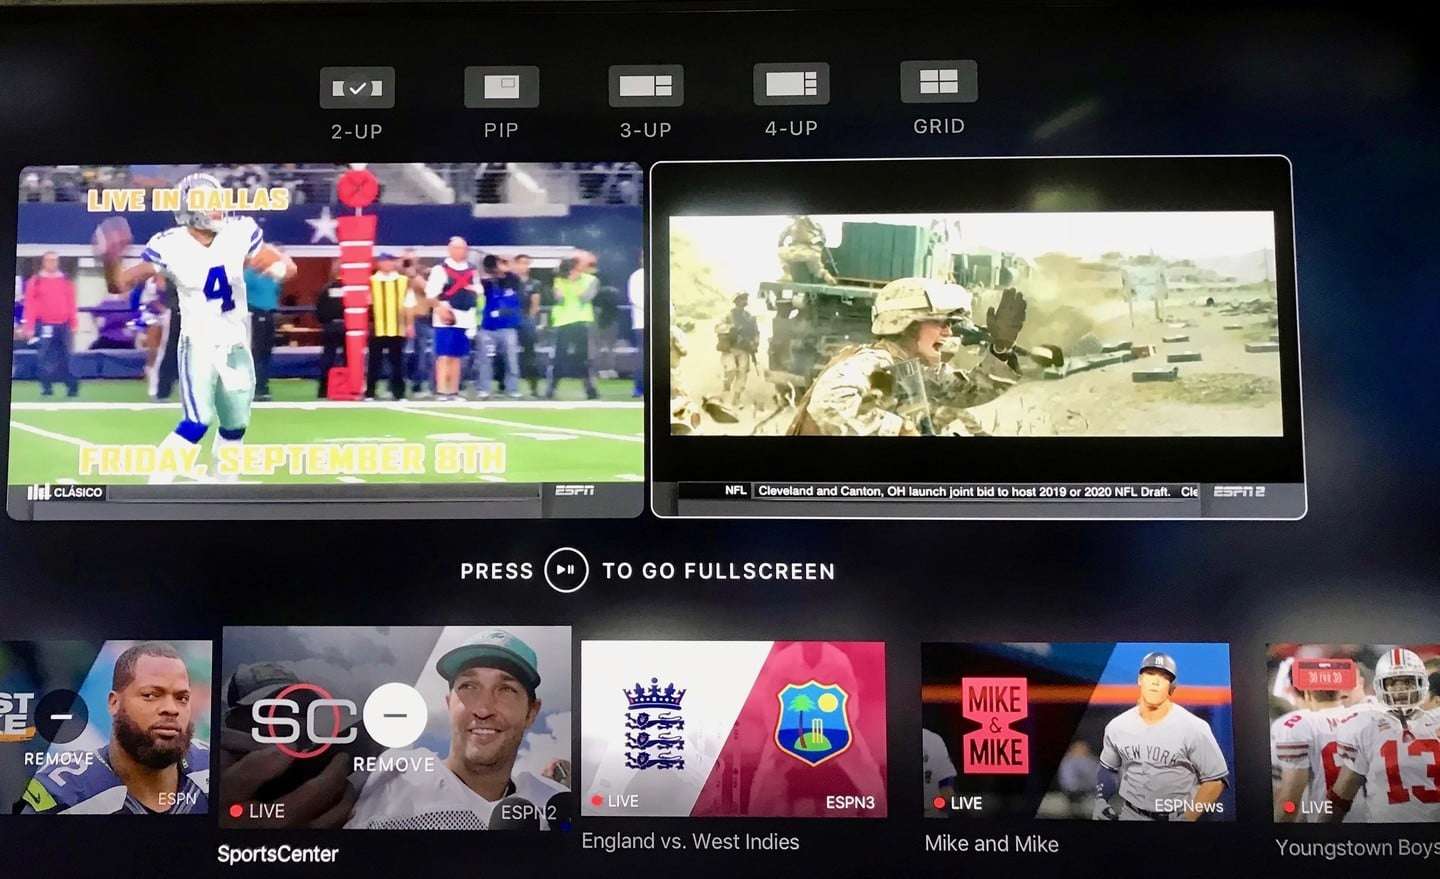 Play Ball: A First Look at ESPN MultiCast on Apple TV